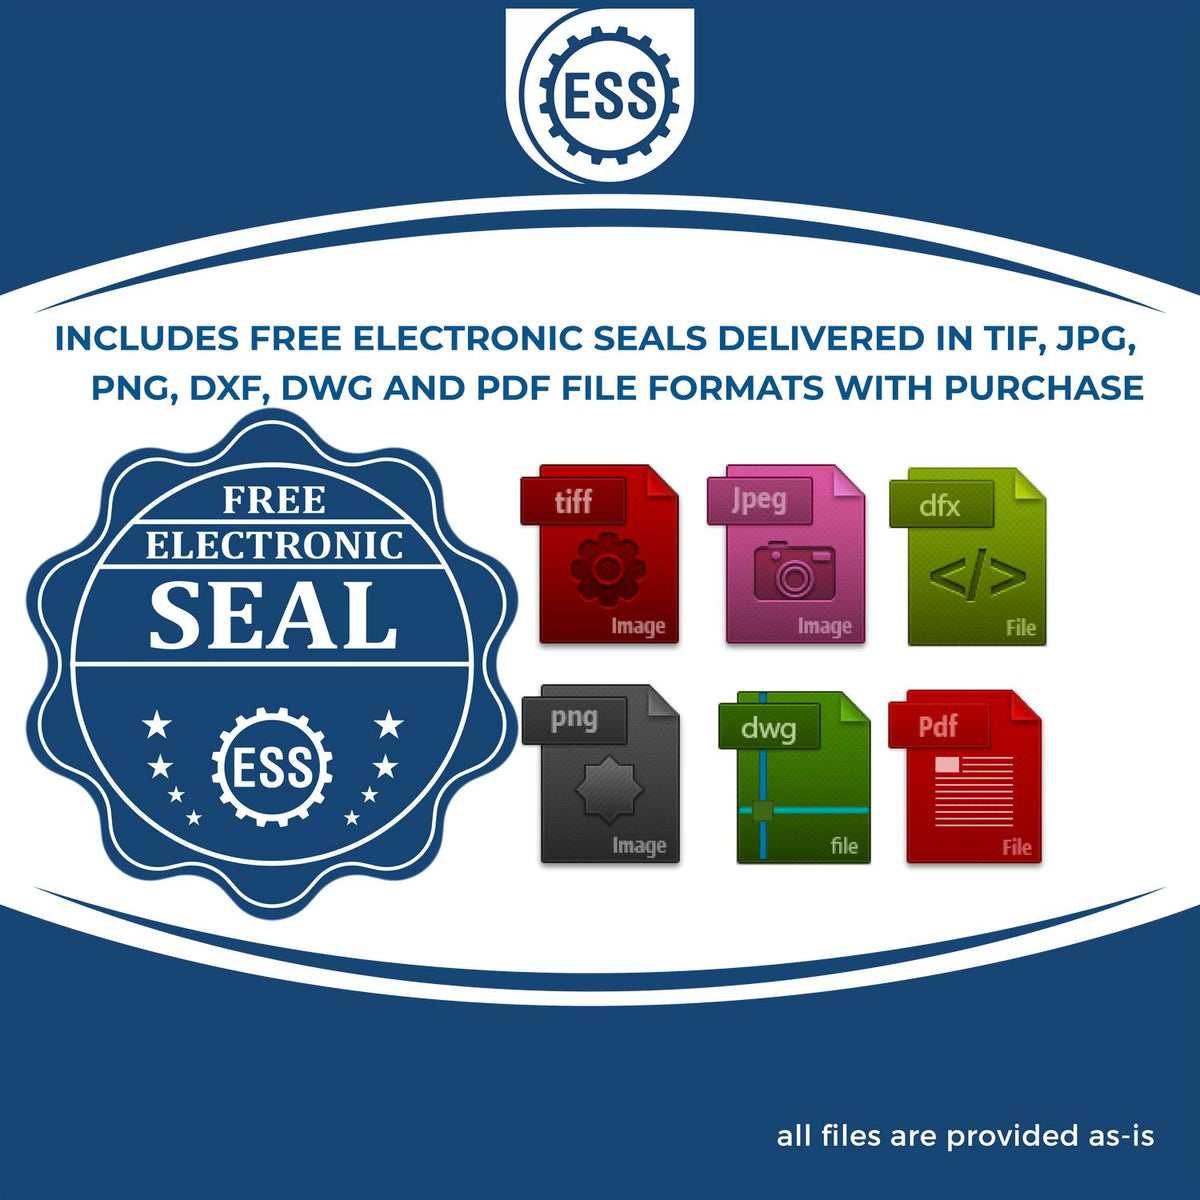 An infographic for the free electronic seal for the Gift Wisconsin Geologist Seal illustrating the different file type icons such as DXF, DWG, TIF, JPG and PNG.